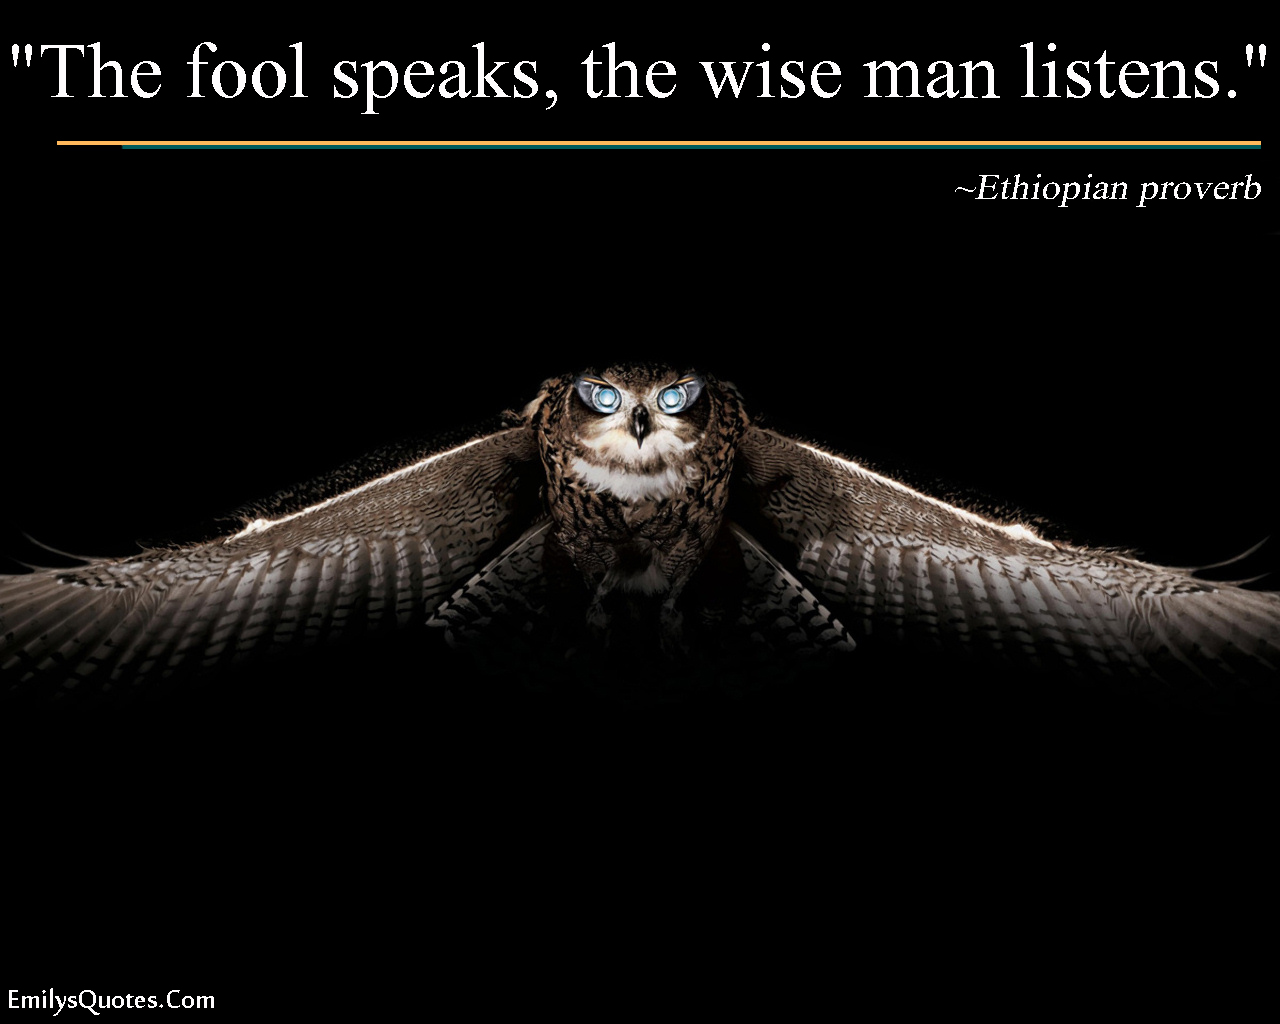 The fool speaks, the wise man listens | Popular ...